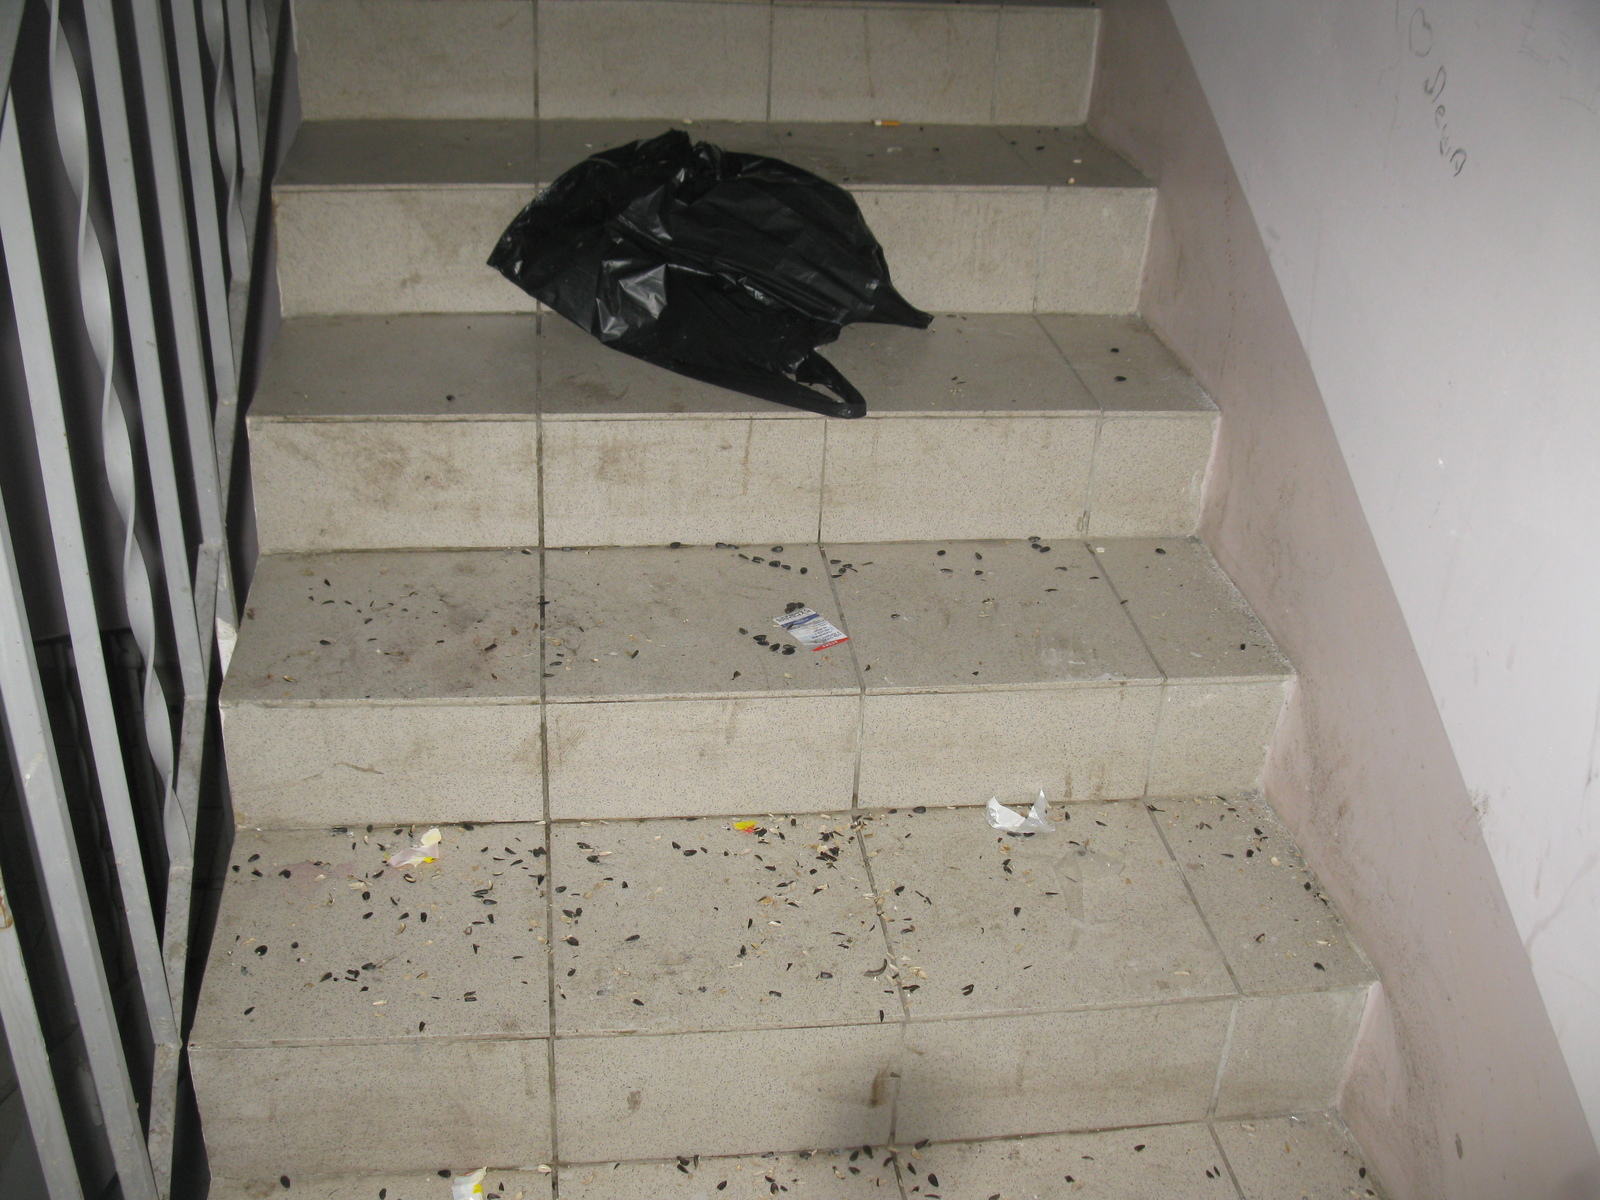 Shared property #3. - My, , Property, Entrance, Wall, Cleaning, Garbage, Vandalism, Longpost, Apartment buildings